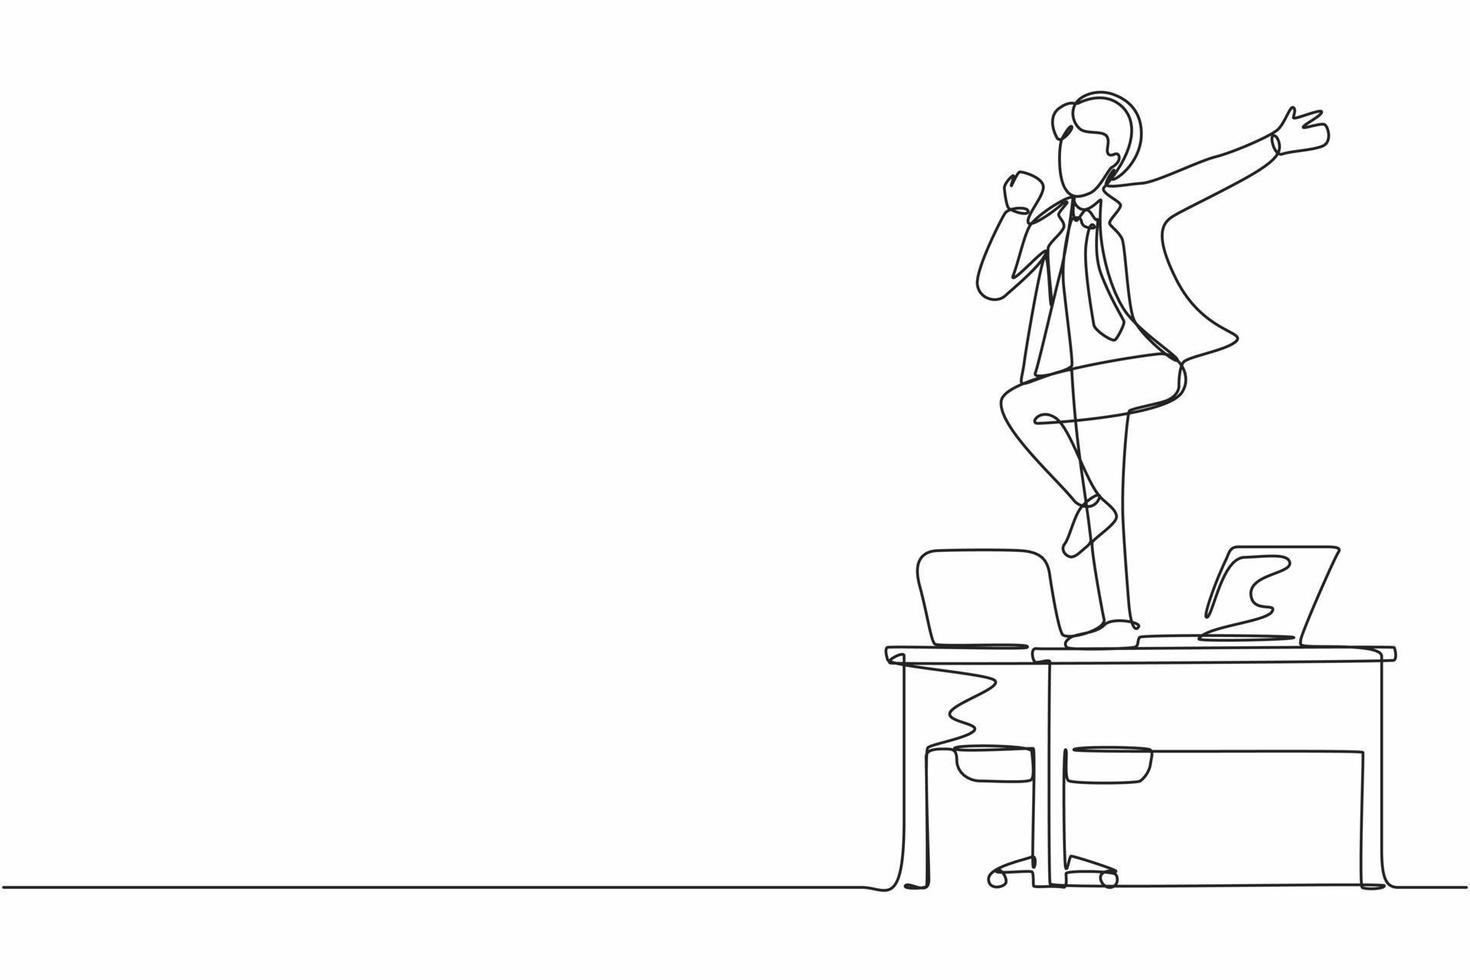 Continuous one line drawing happy office worker dancing on desk. Young businessman dancing while sitting at desk. Having fun at work. Work from home concept. Single line draw design vector graphic